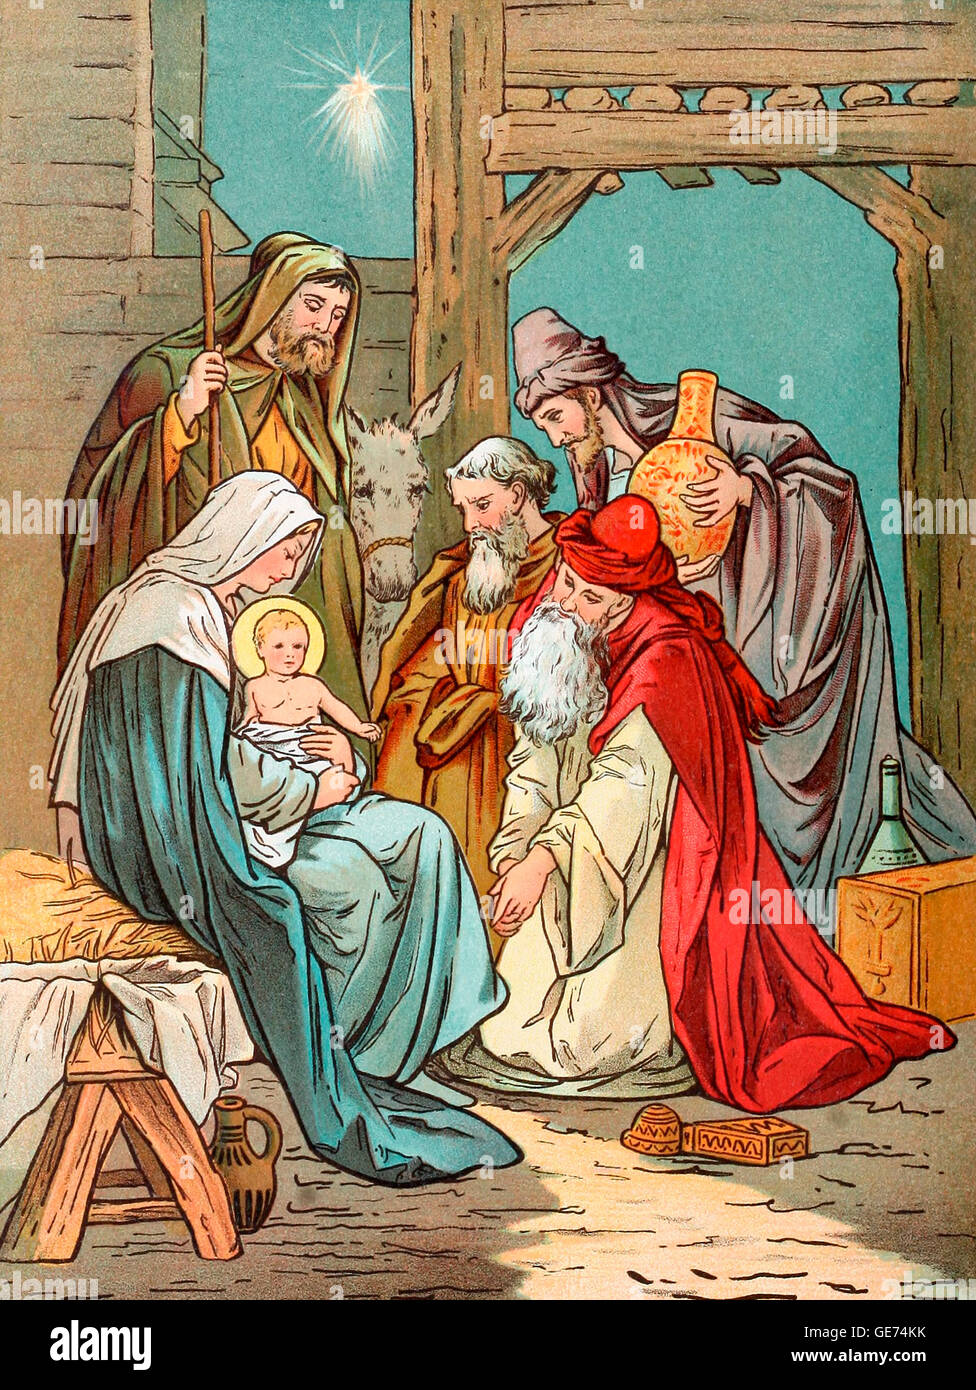 The Holy Child and the Wise Men, Birth of Jesus Stock Photo